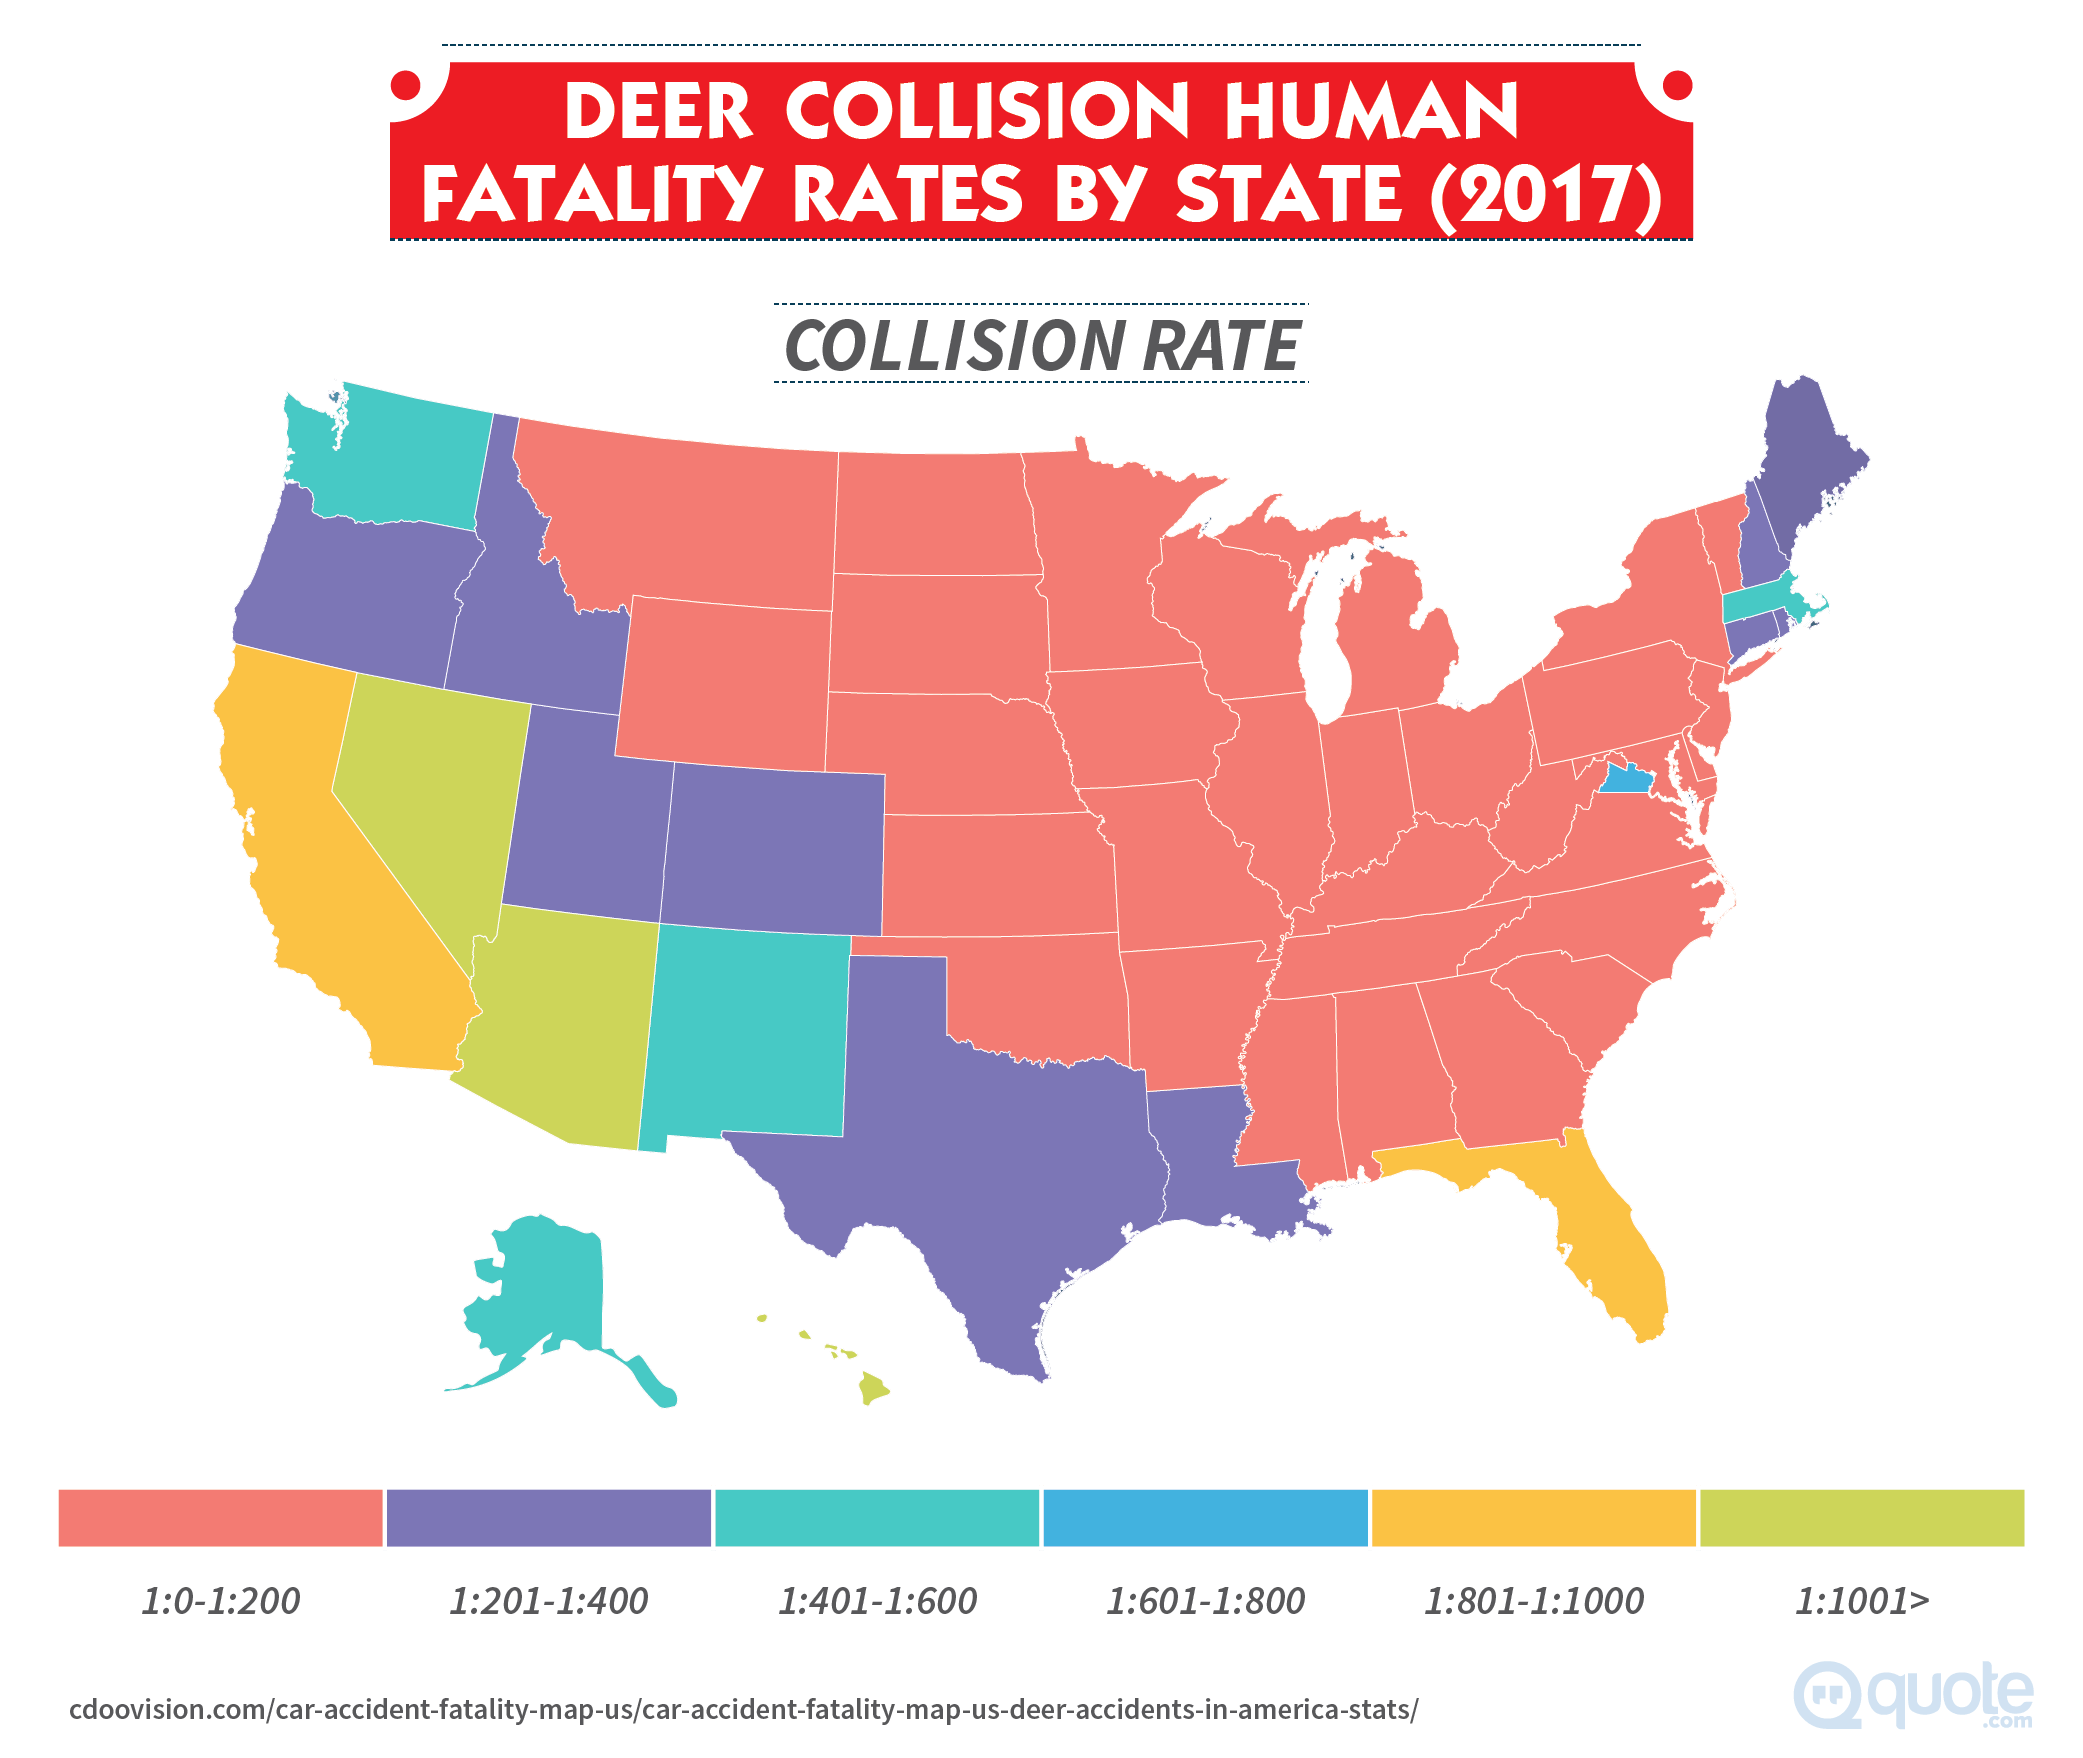 2017 Deer Collision Human Fatality Rates By State